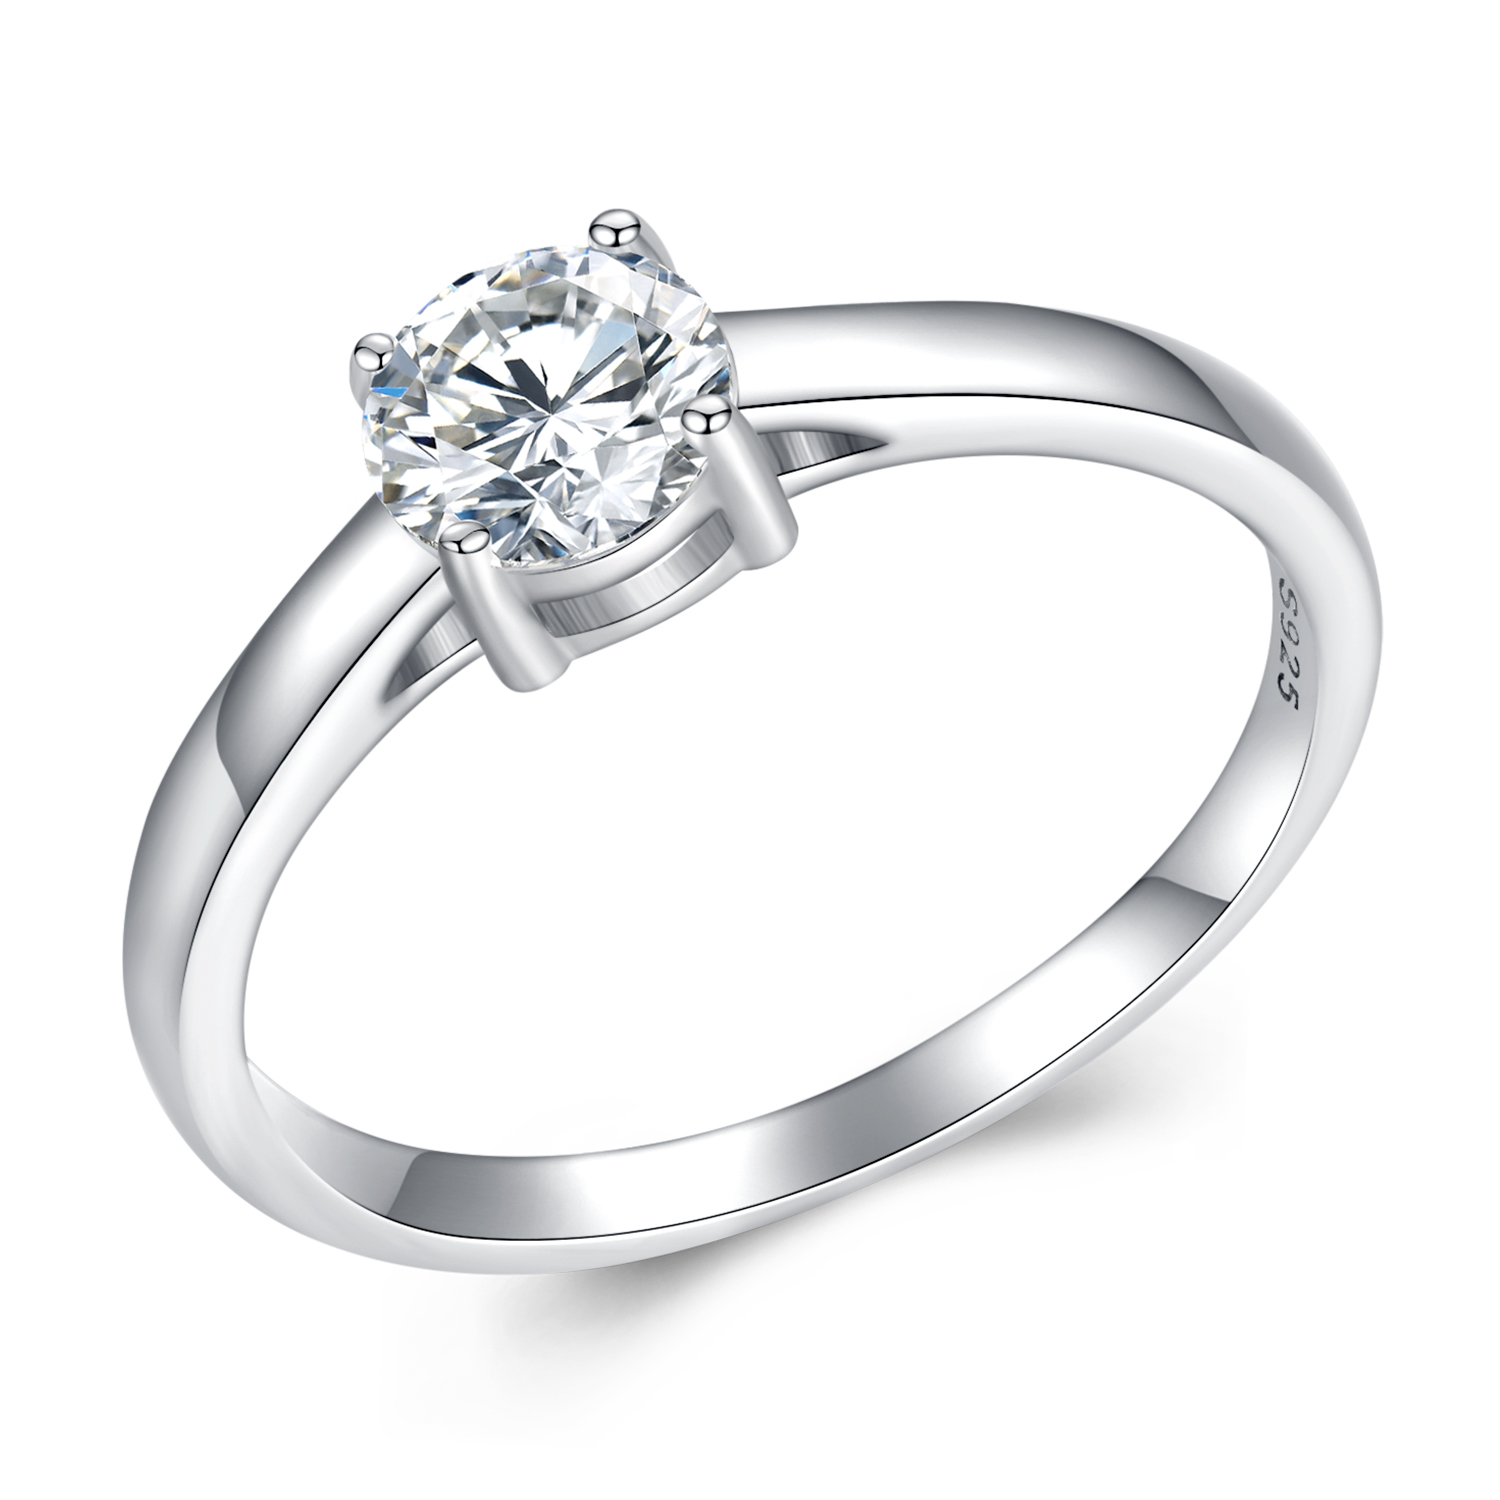 pandora style shining moissanite ring comes with one certificate msr005